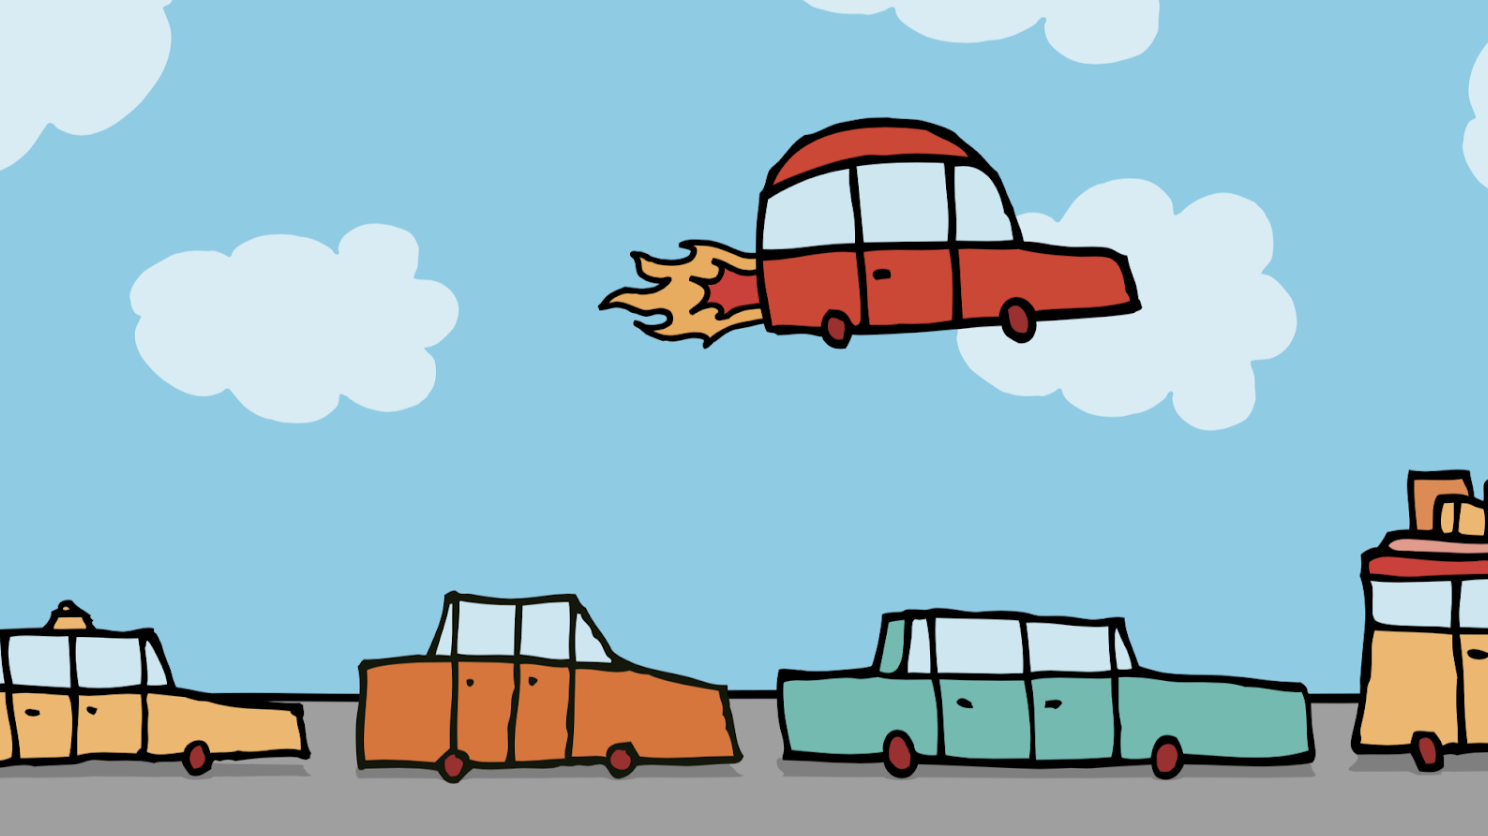 Illustration of red car with flames shooting out of the back, flying over line of cars on sunny roadway.